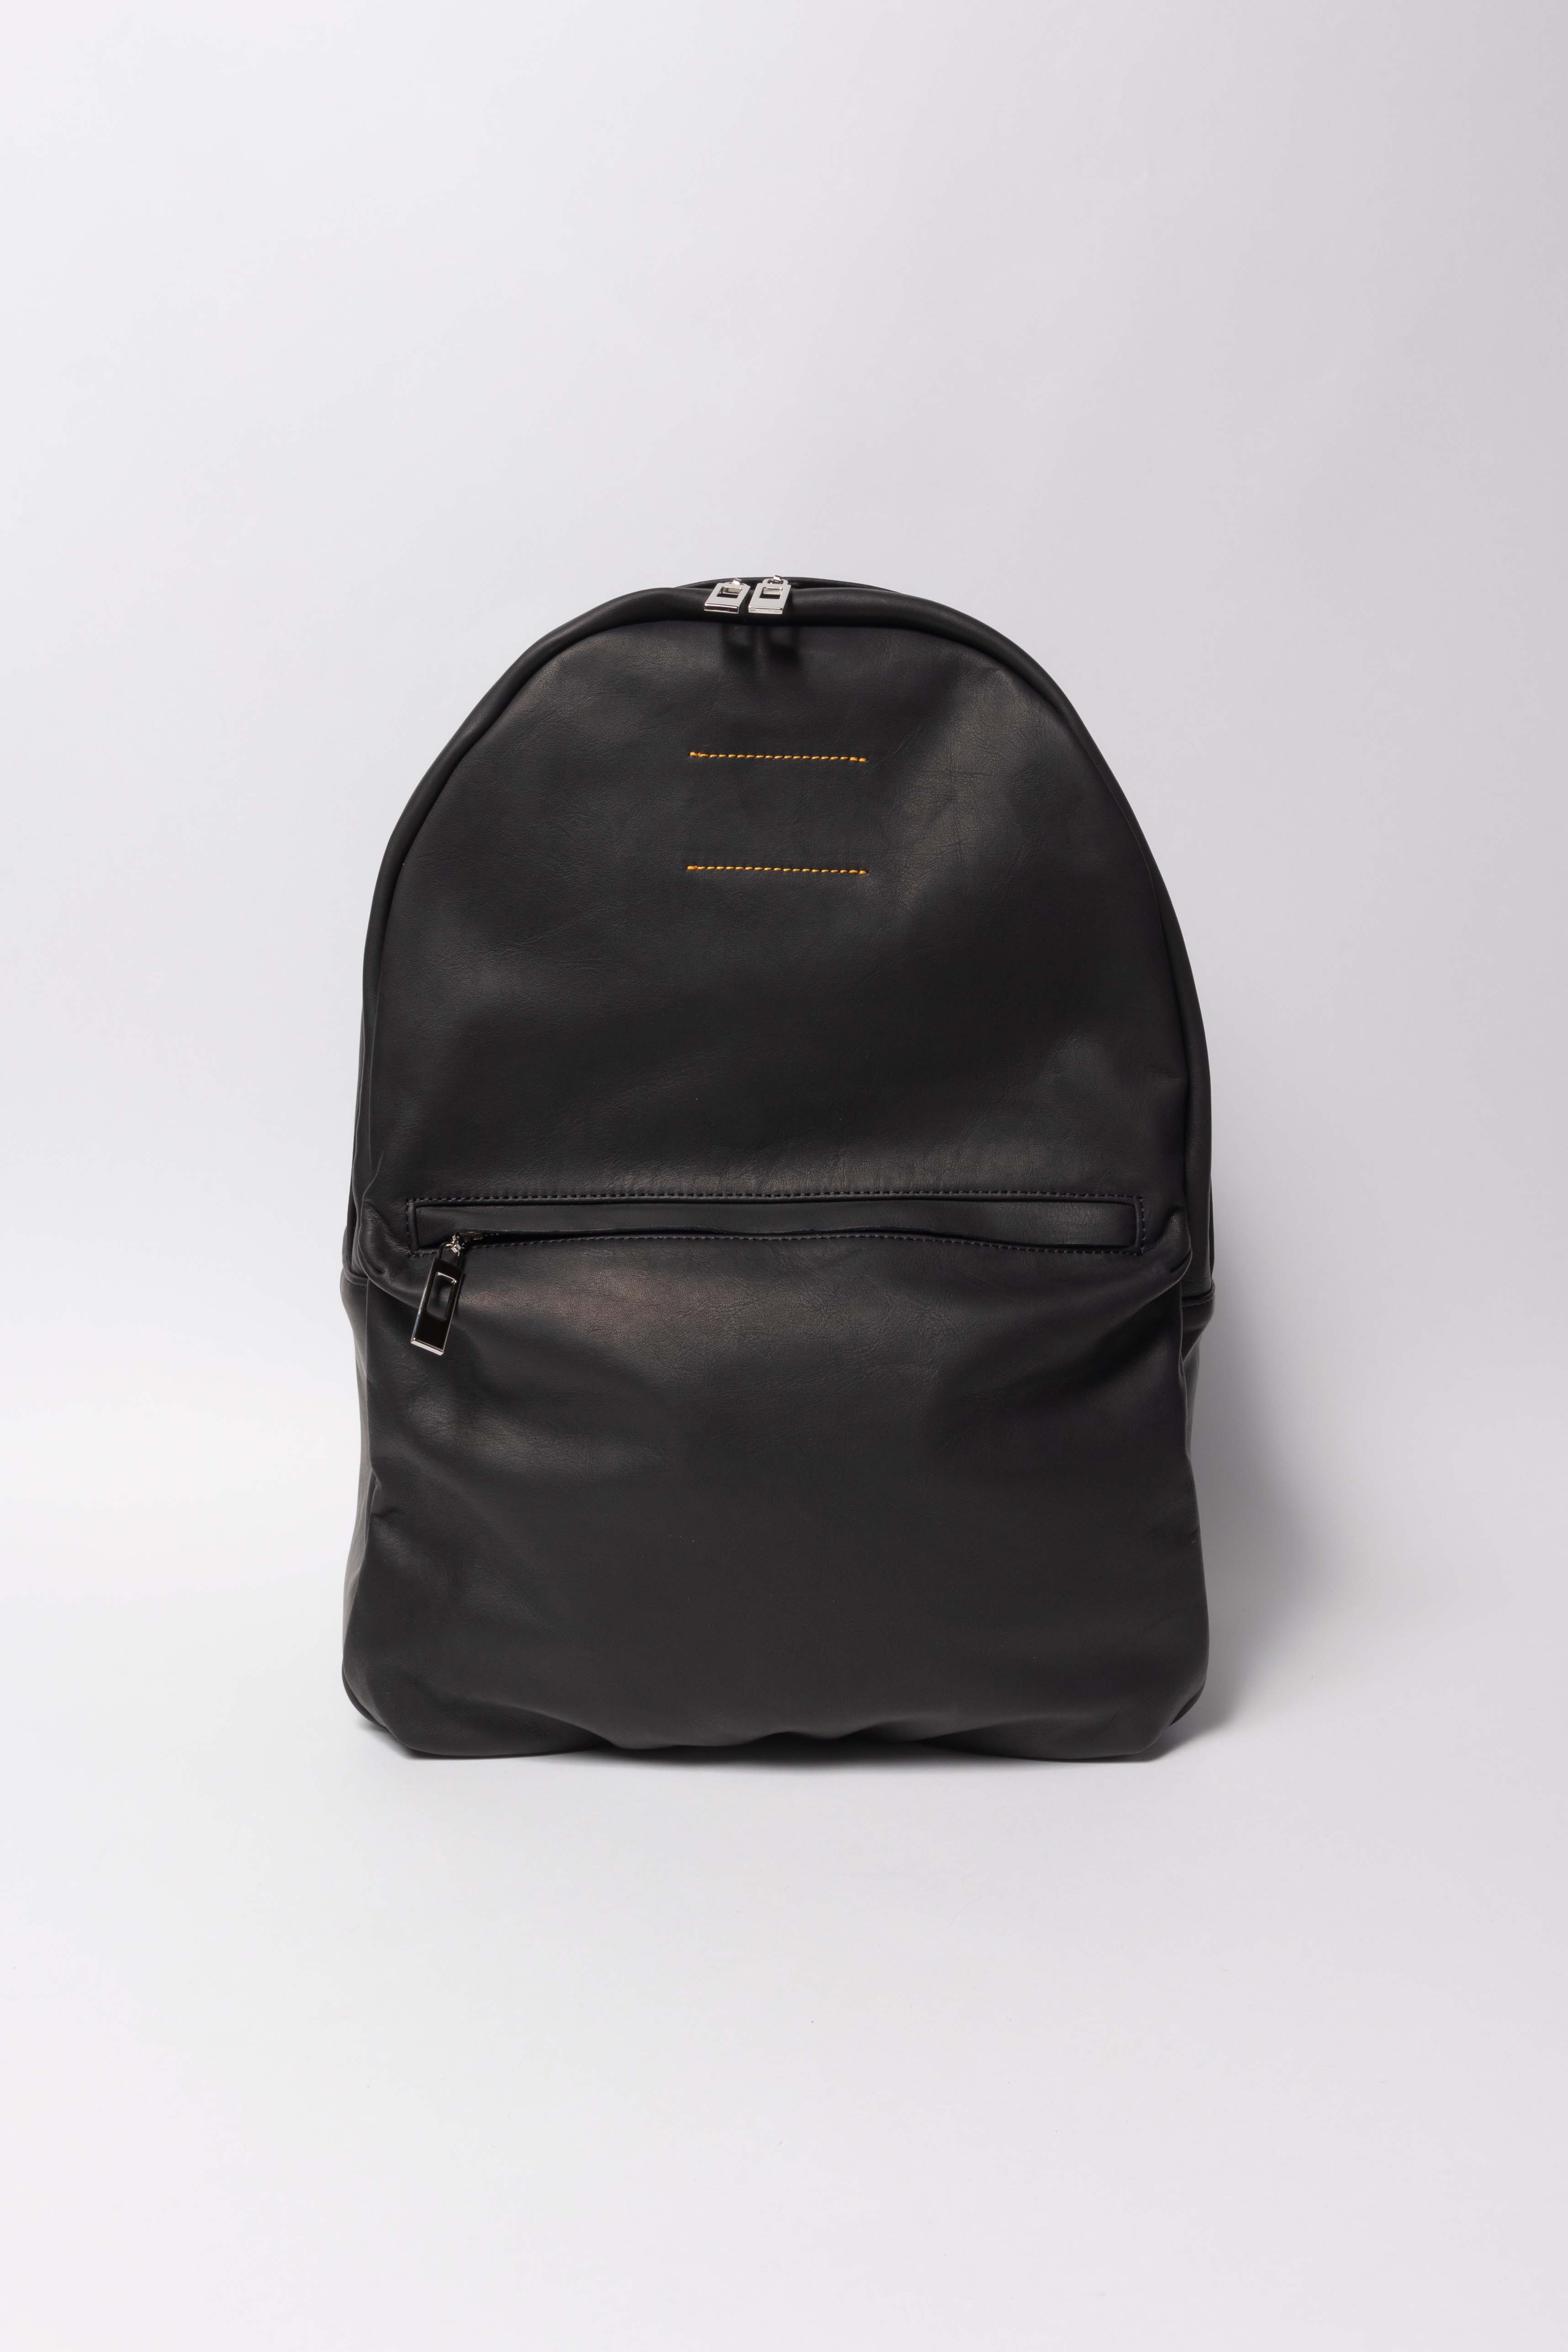 cotton100%VAULTROOM LEATHER BACKPACK